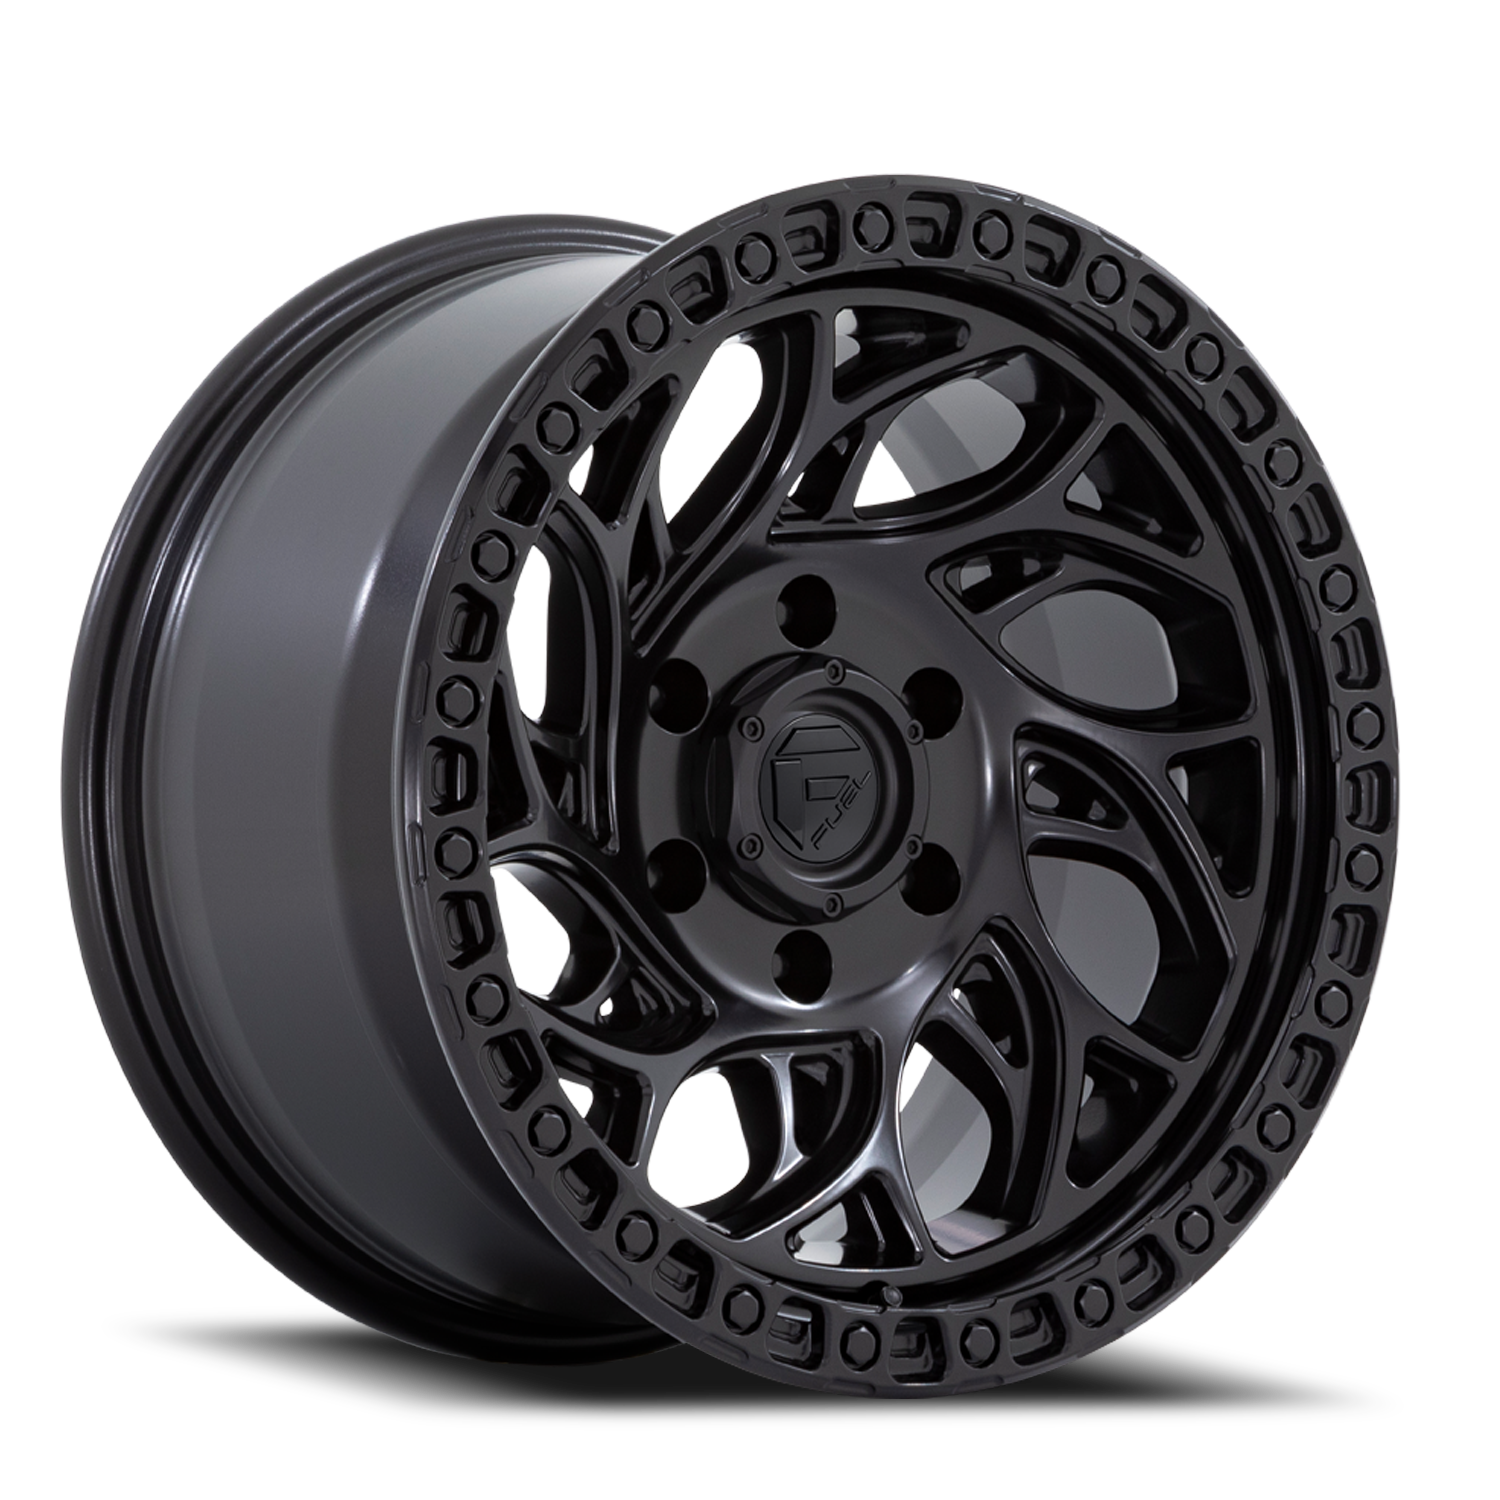 Aluminum Wheels 20X9 Runner OR D852 6 On 120 Blackout 67.06 Bore 20 Offset Fuel Off Road Wheels